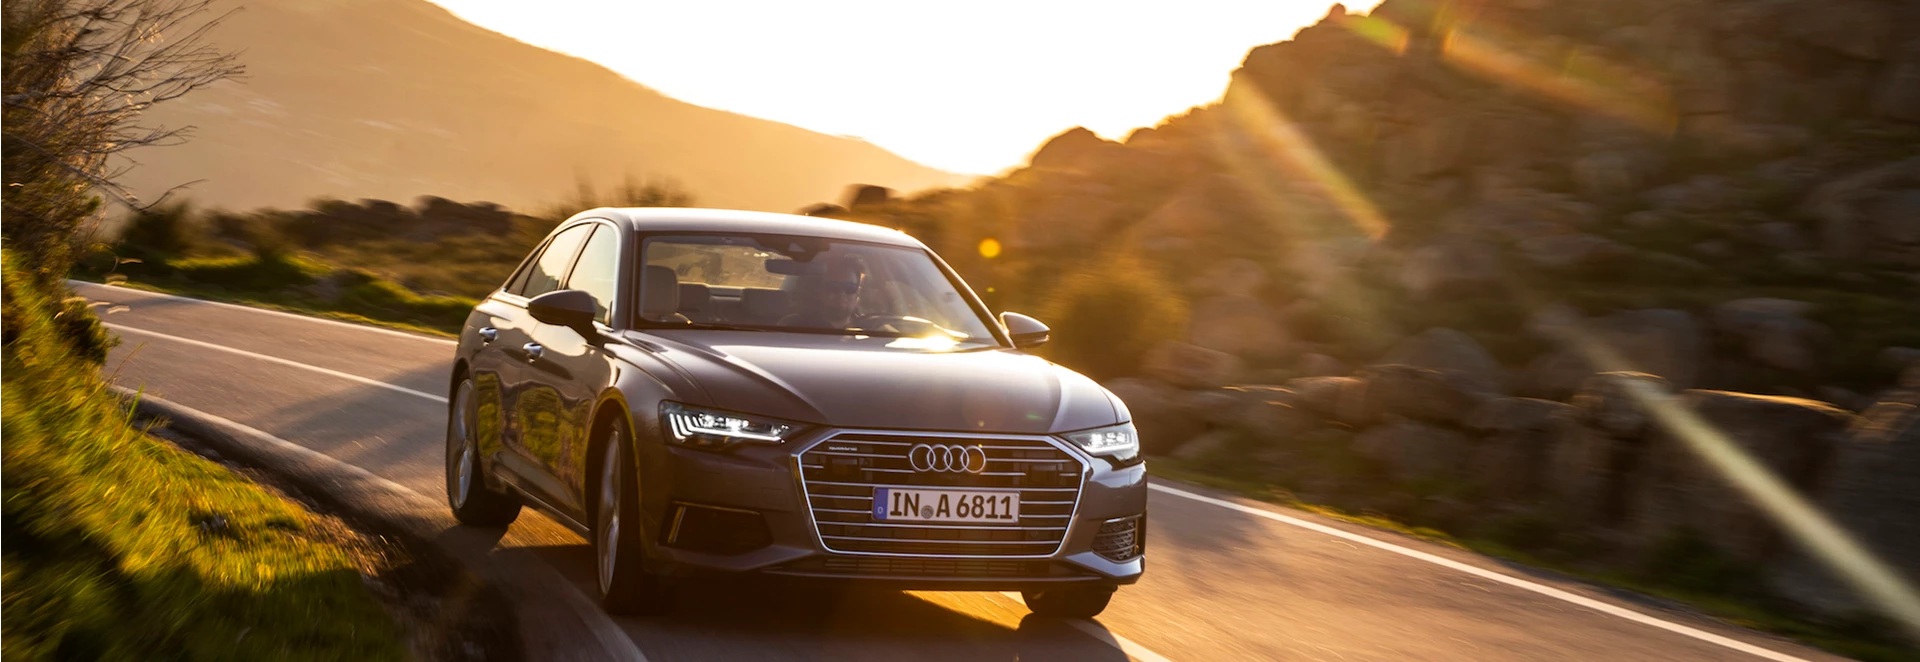 2018 Audi A6 – The latest features you don’t want to miss